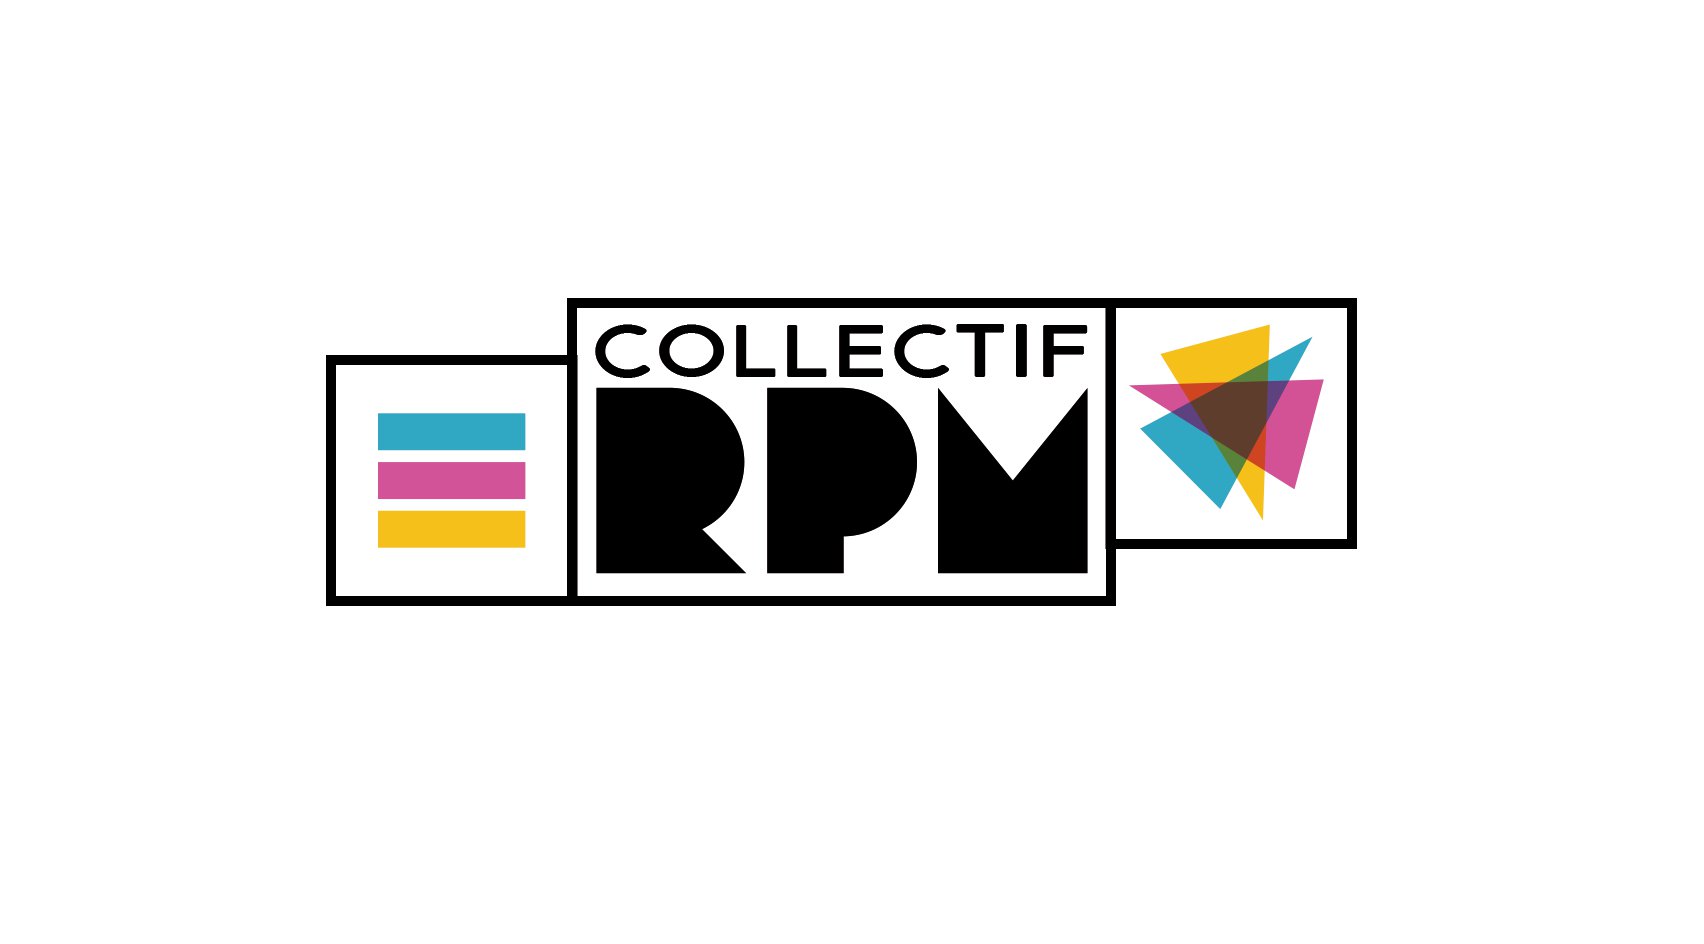 Collectif rpm